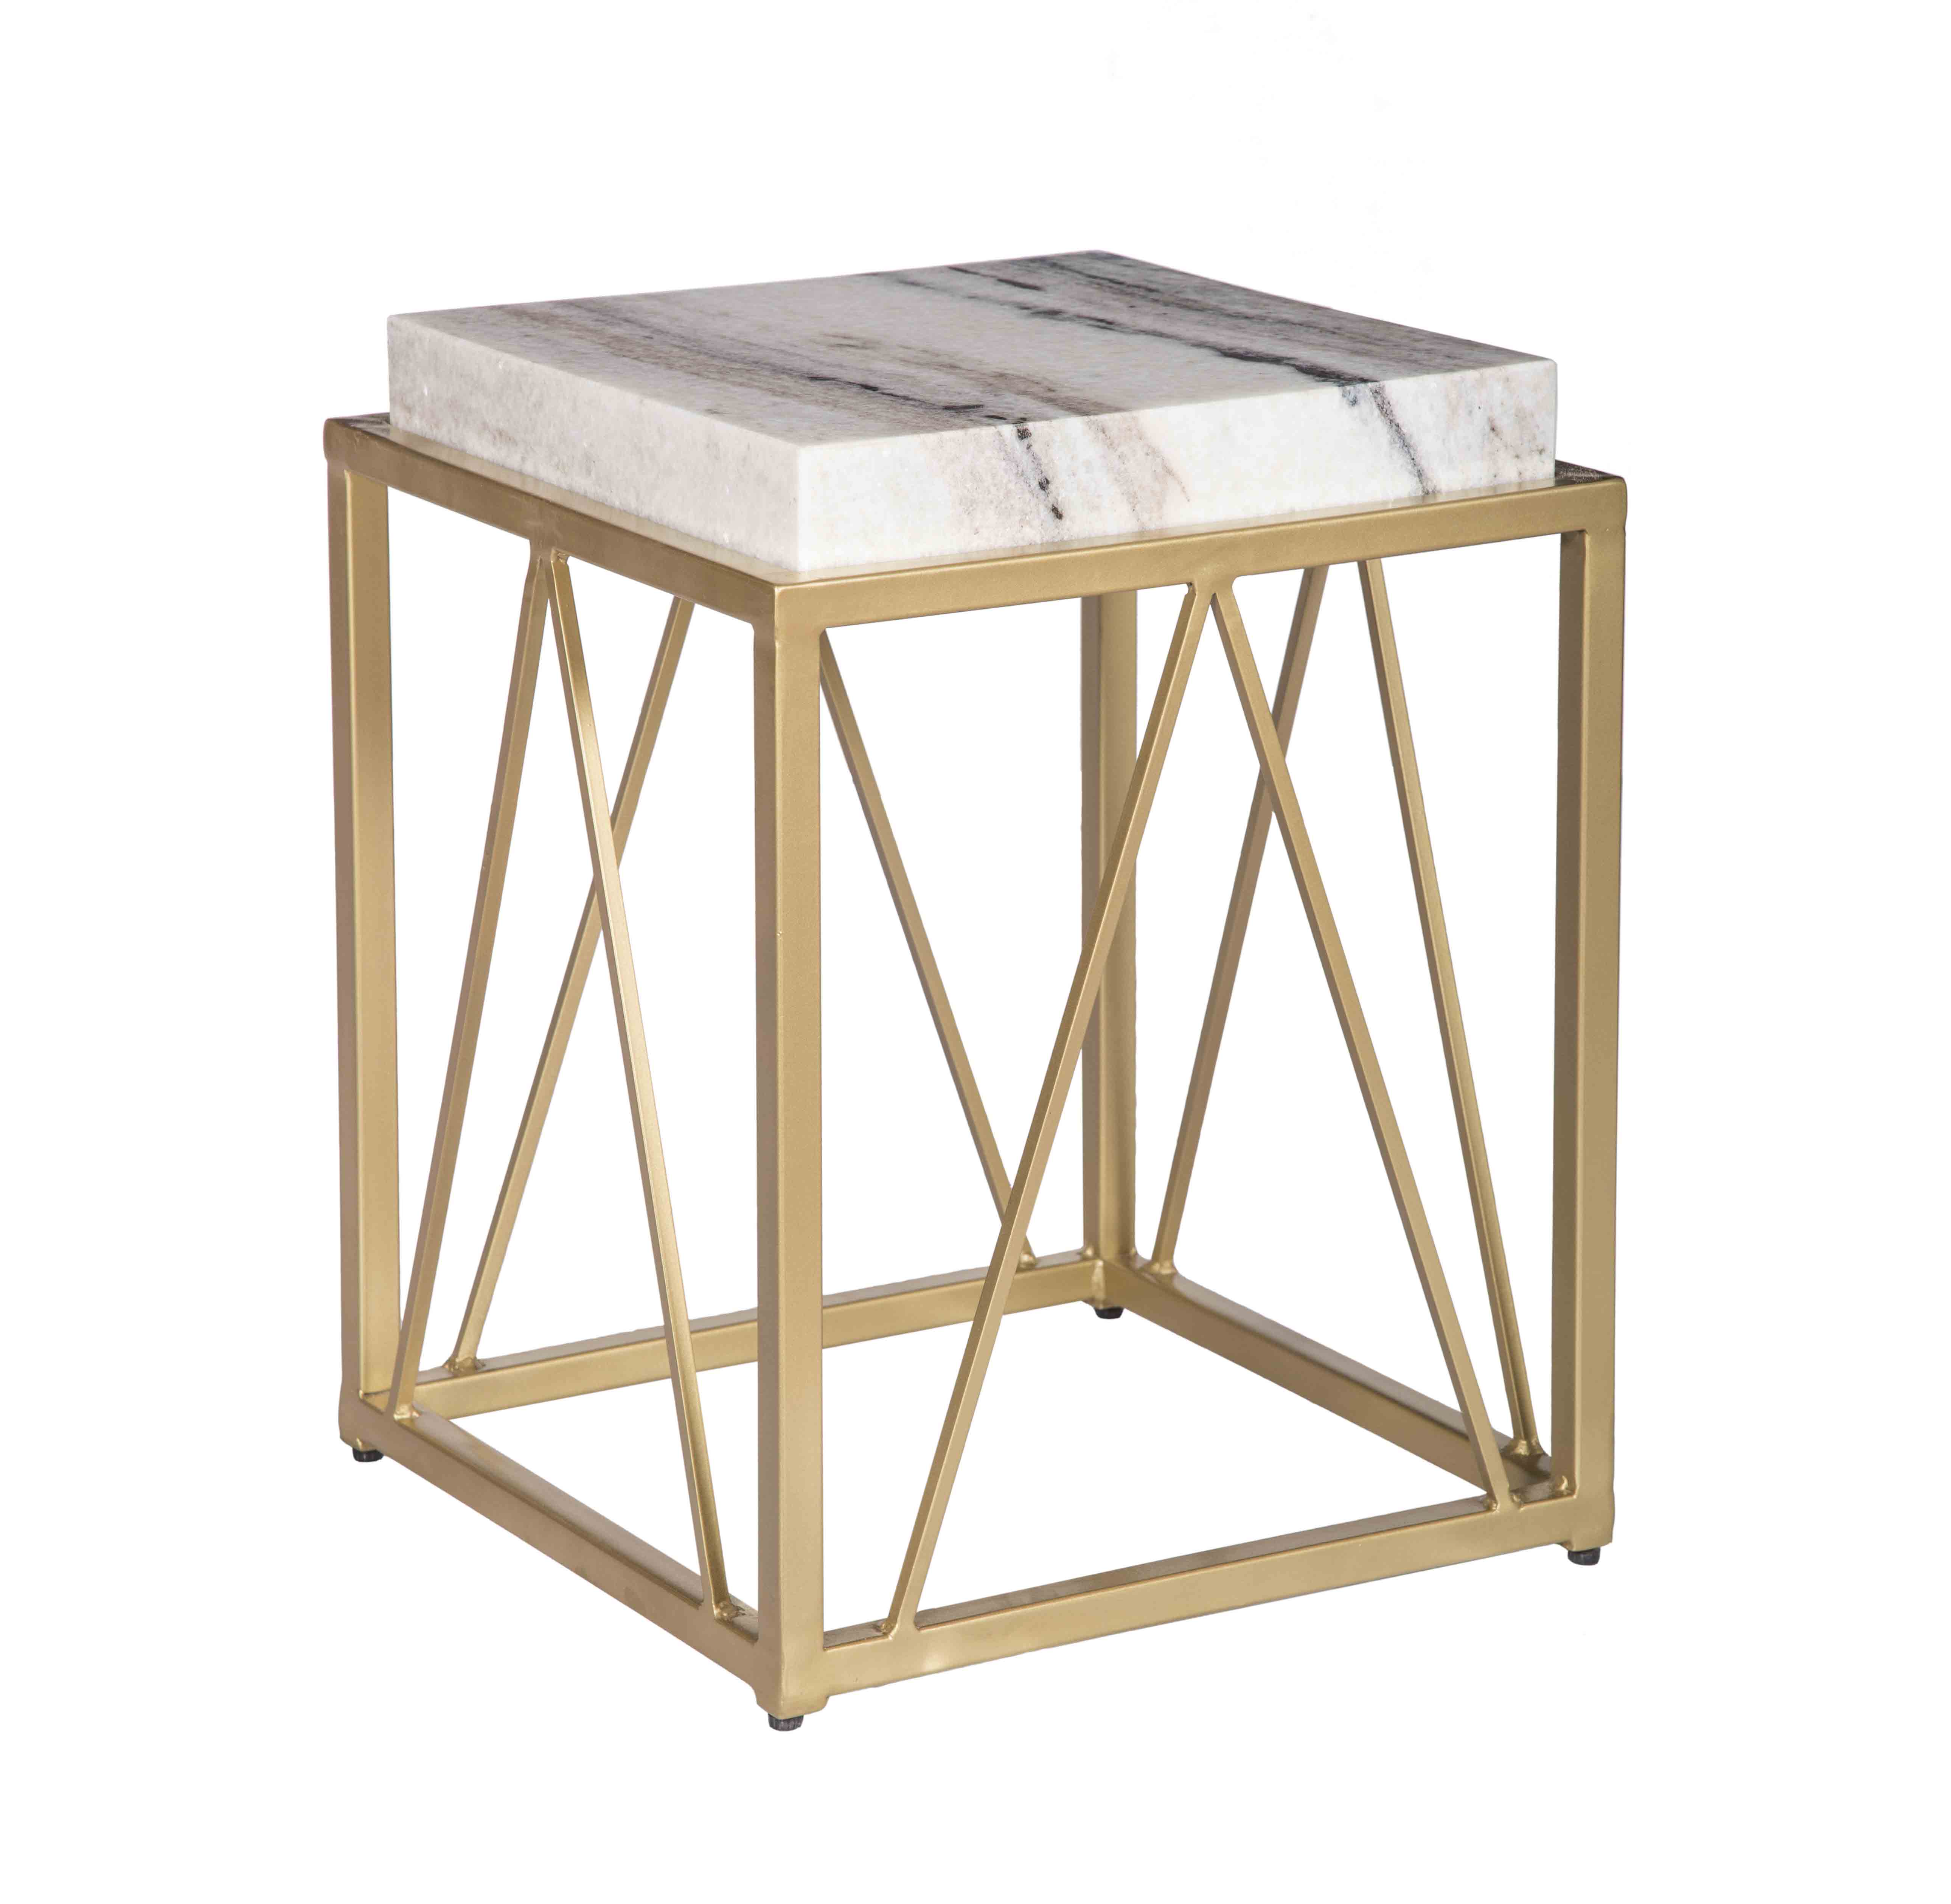 coast white gold accent table the classy home ctc click enlarge wood and side outdoor daybeds clearance tall narrow sofa small black with drawers night stands acrylic coffee tray